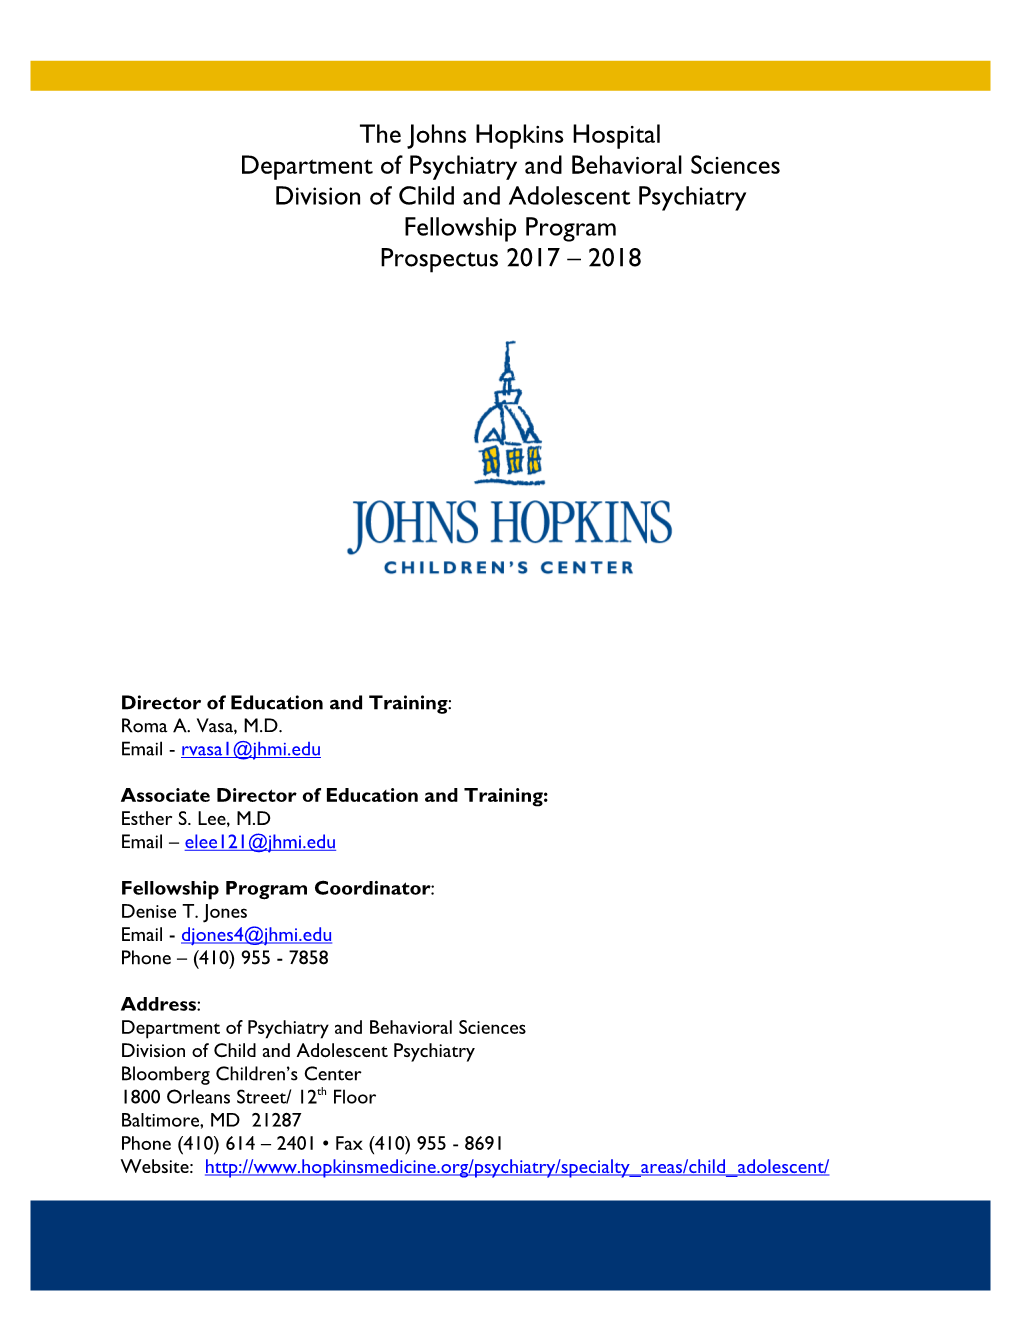 The Johns Hopkins Hospital Department of Psychiatry and Behavioral Sciences Division of Child and Adolescent Psychiatry Fellowship Program Prospectus 2017 – 2018